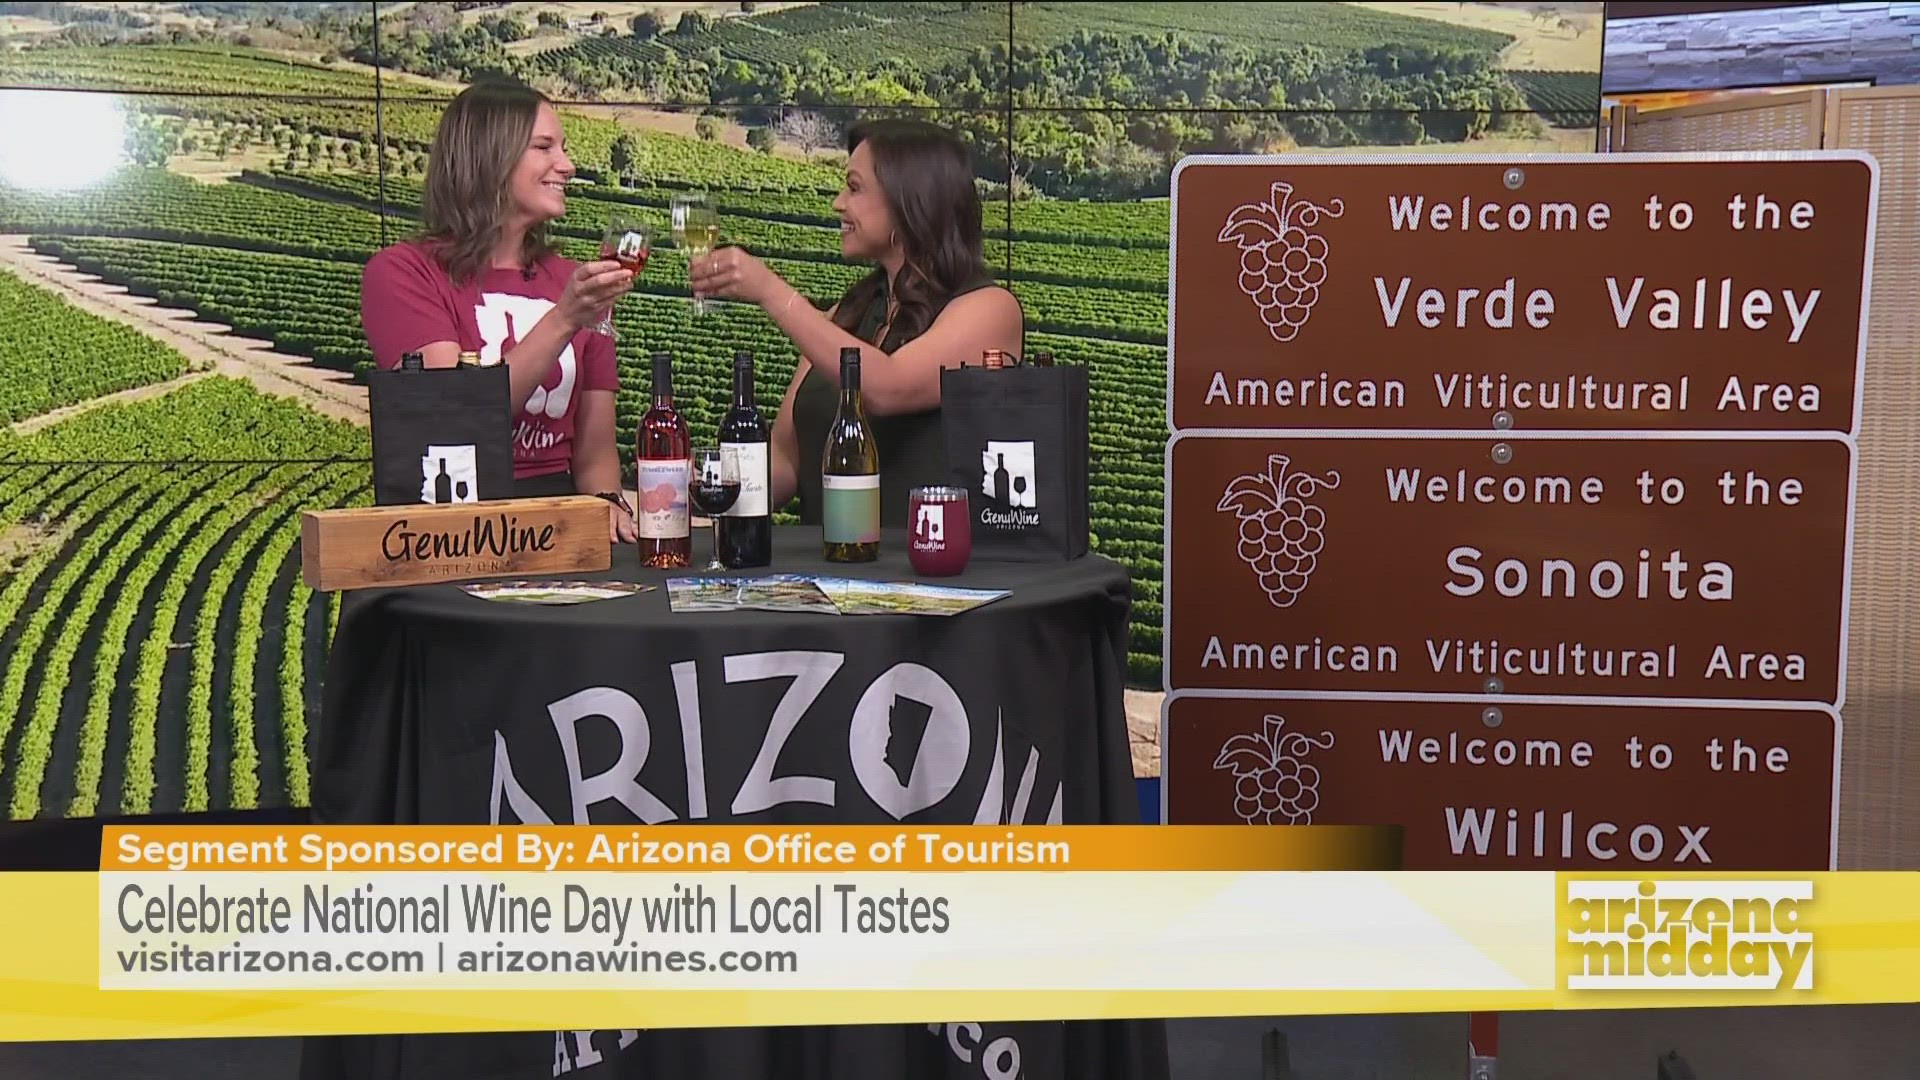 GenuWine Arizona’s Emily Rieve shares some local wines you should give a try!